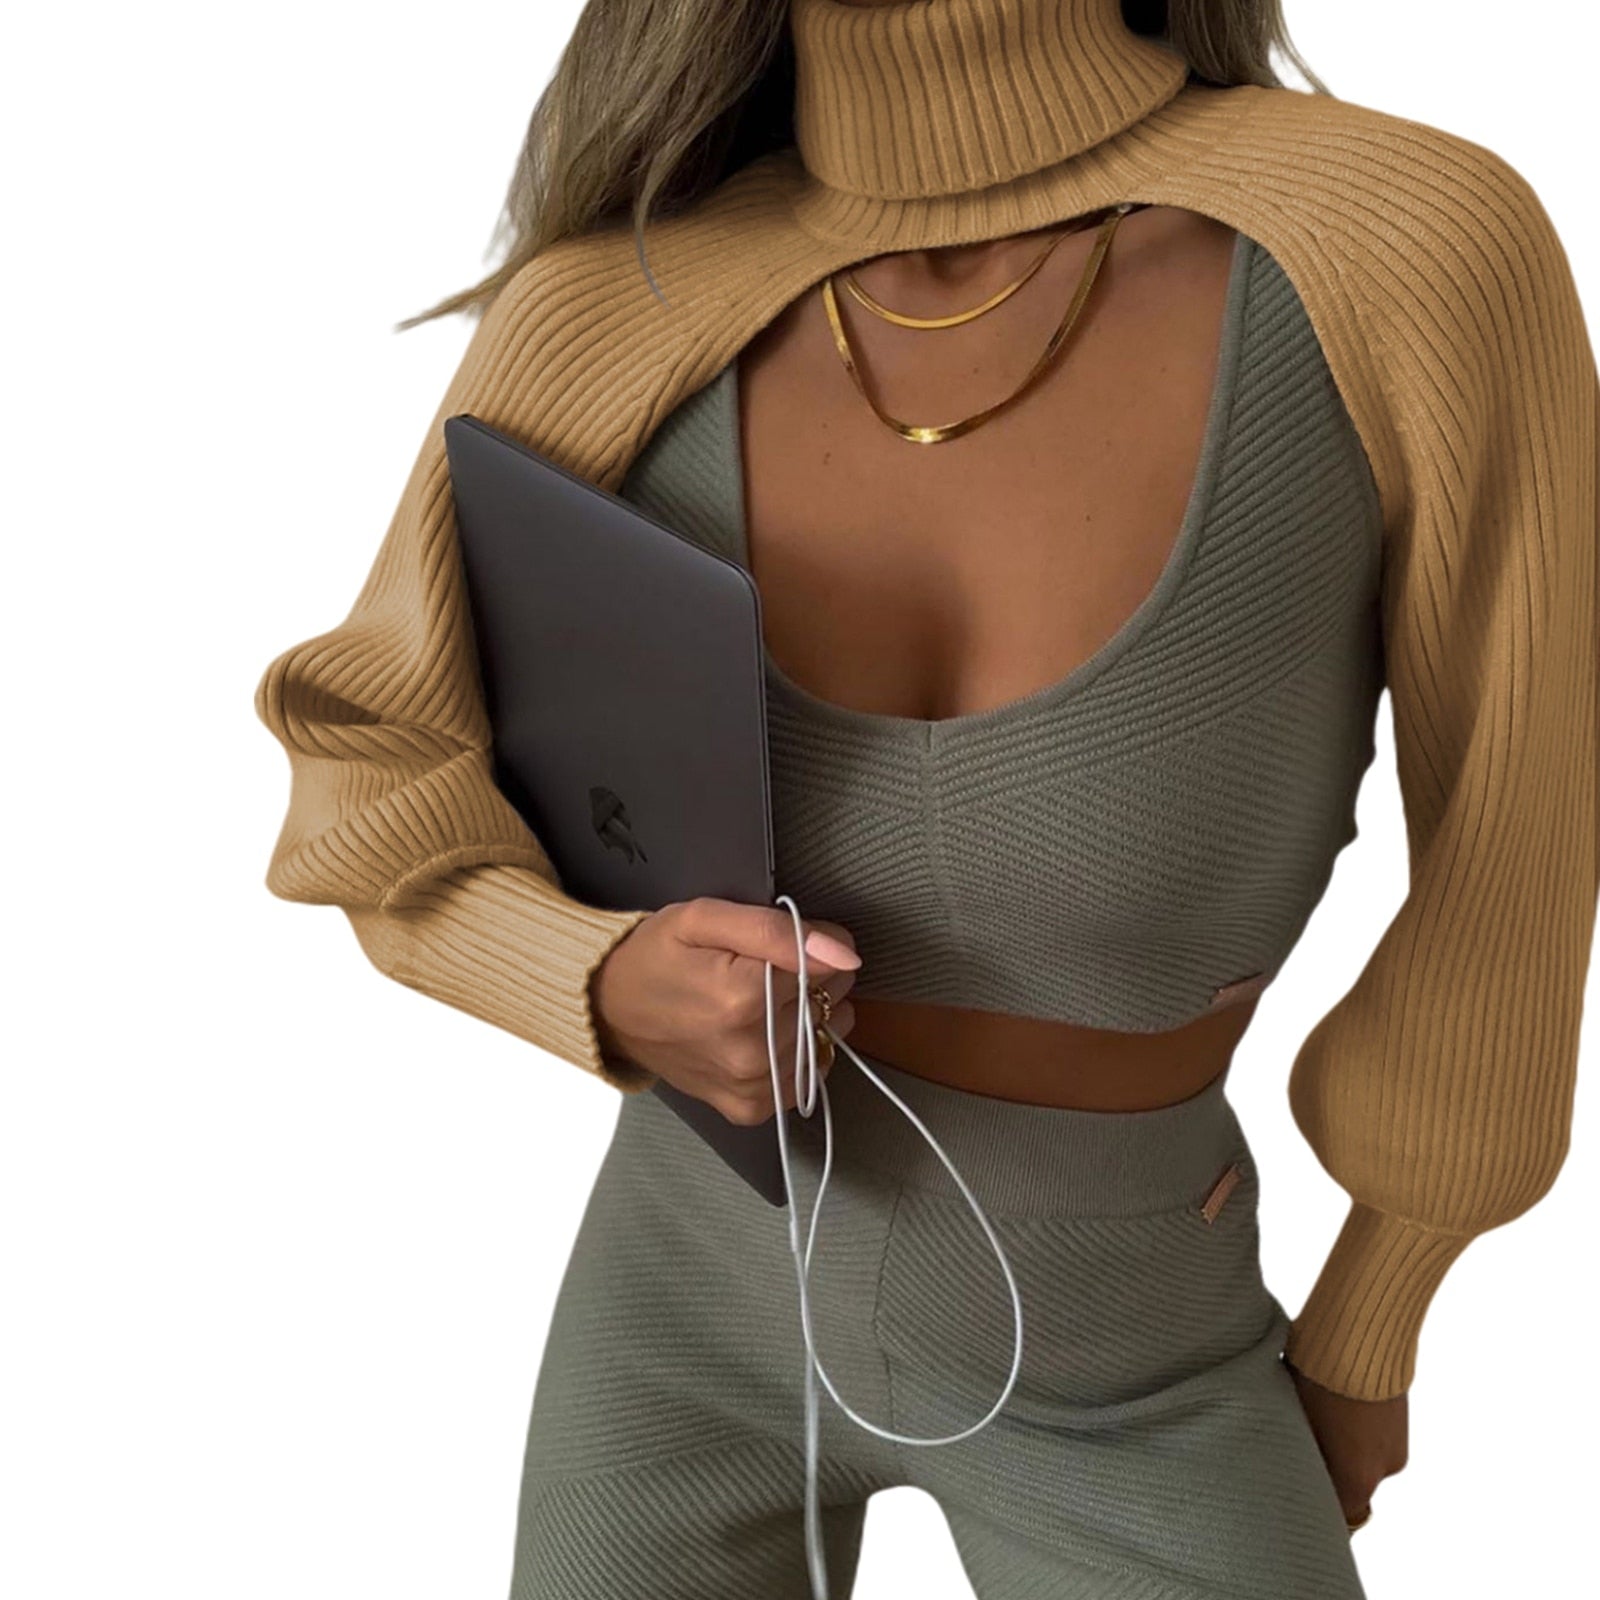 Tossy Autumn Turtleneck Sweater Shrugs For Women Knit Long-sleeve Tops Pullover 2023 ZA New Casual Crop Top Knitwear Ladies